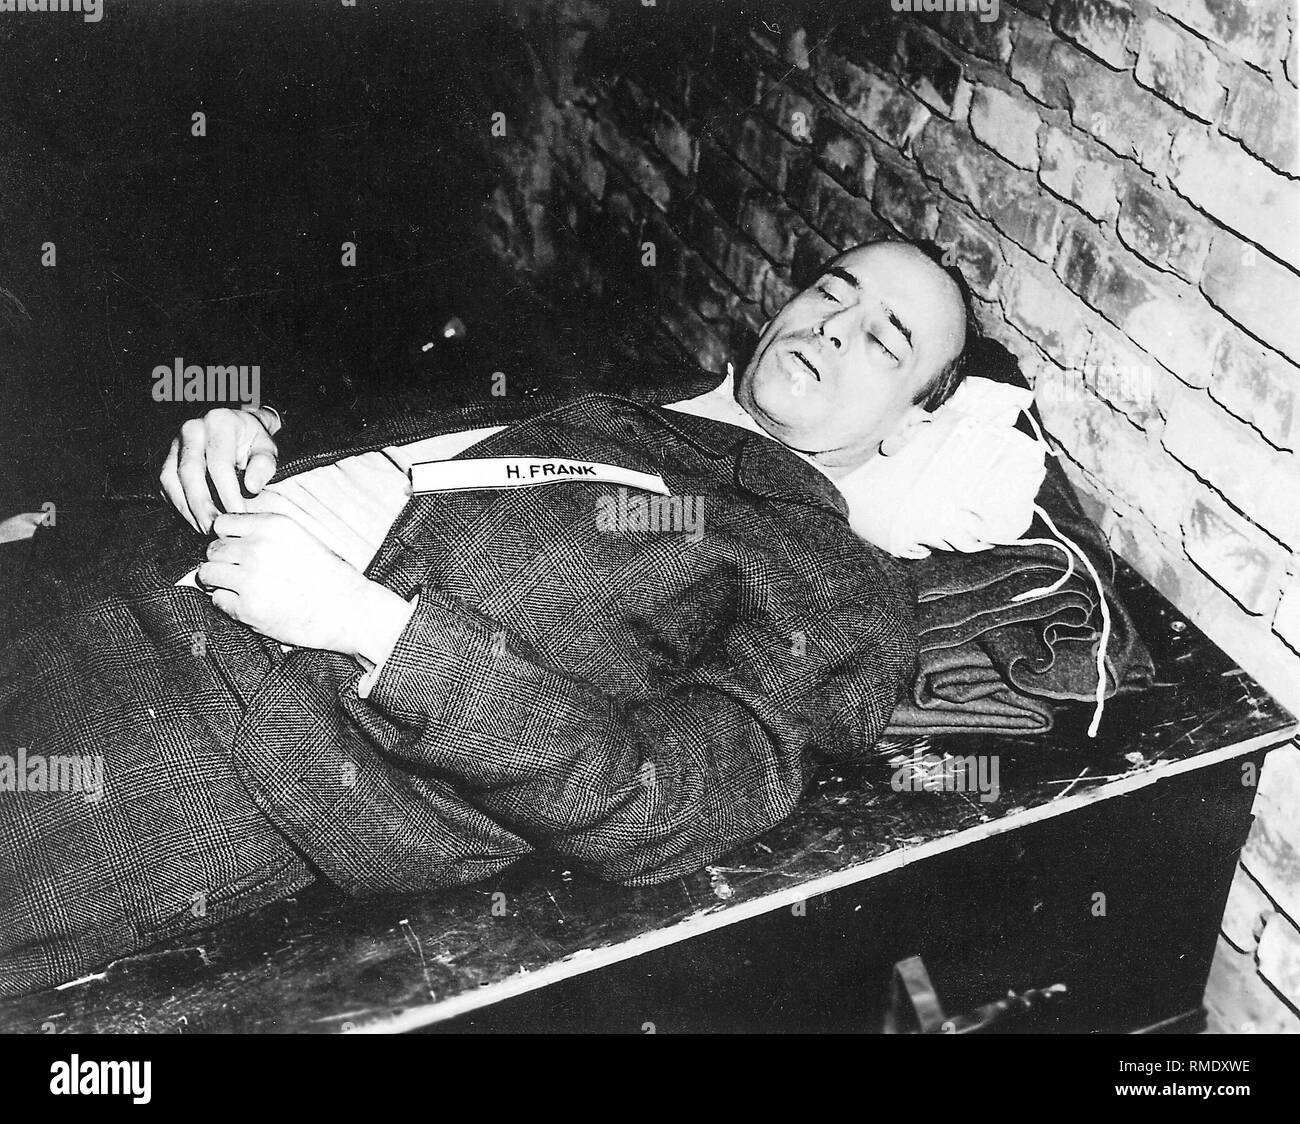 Reich Minister Hans Frank after his execution by hanging on October 16, 1946 in Nuremberg (Nuremberg trials). Stock Photo